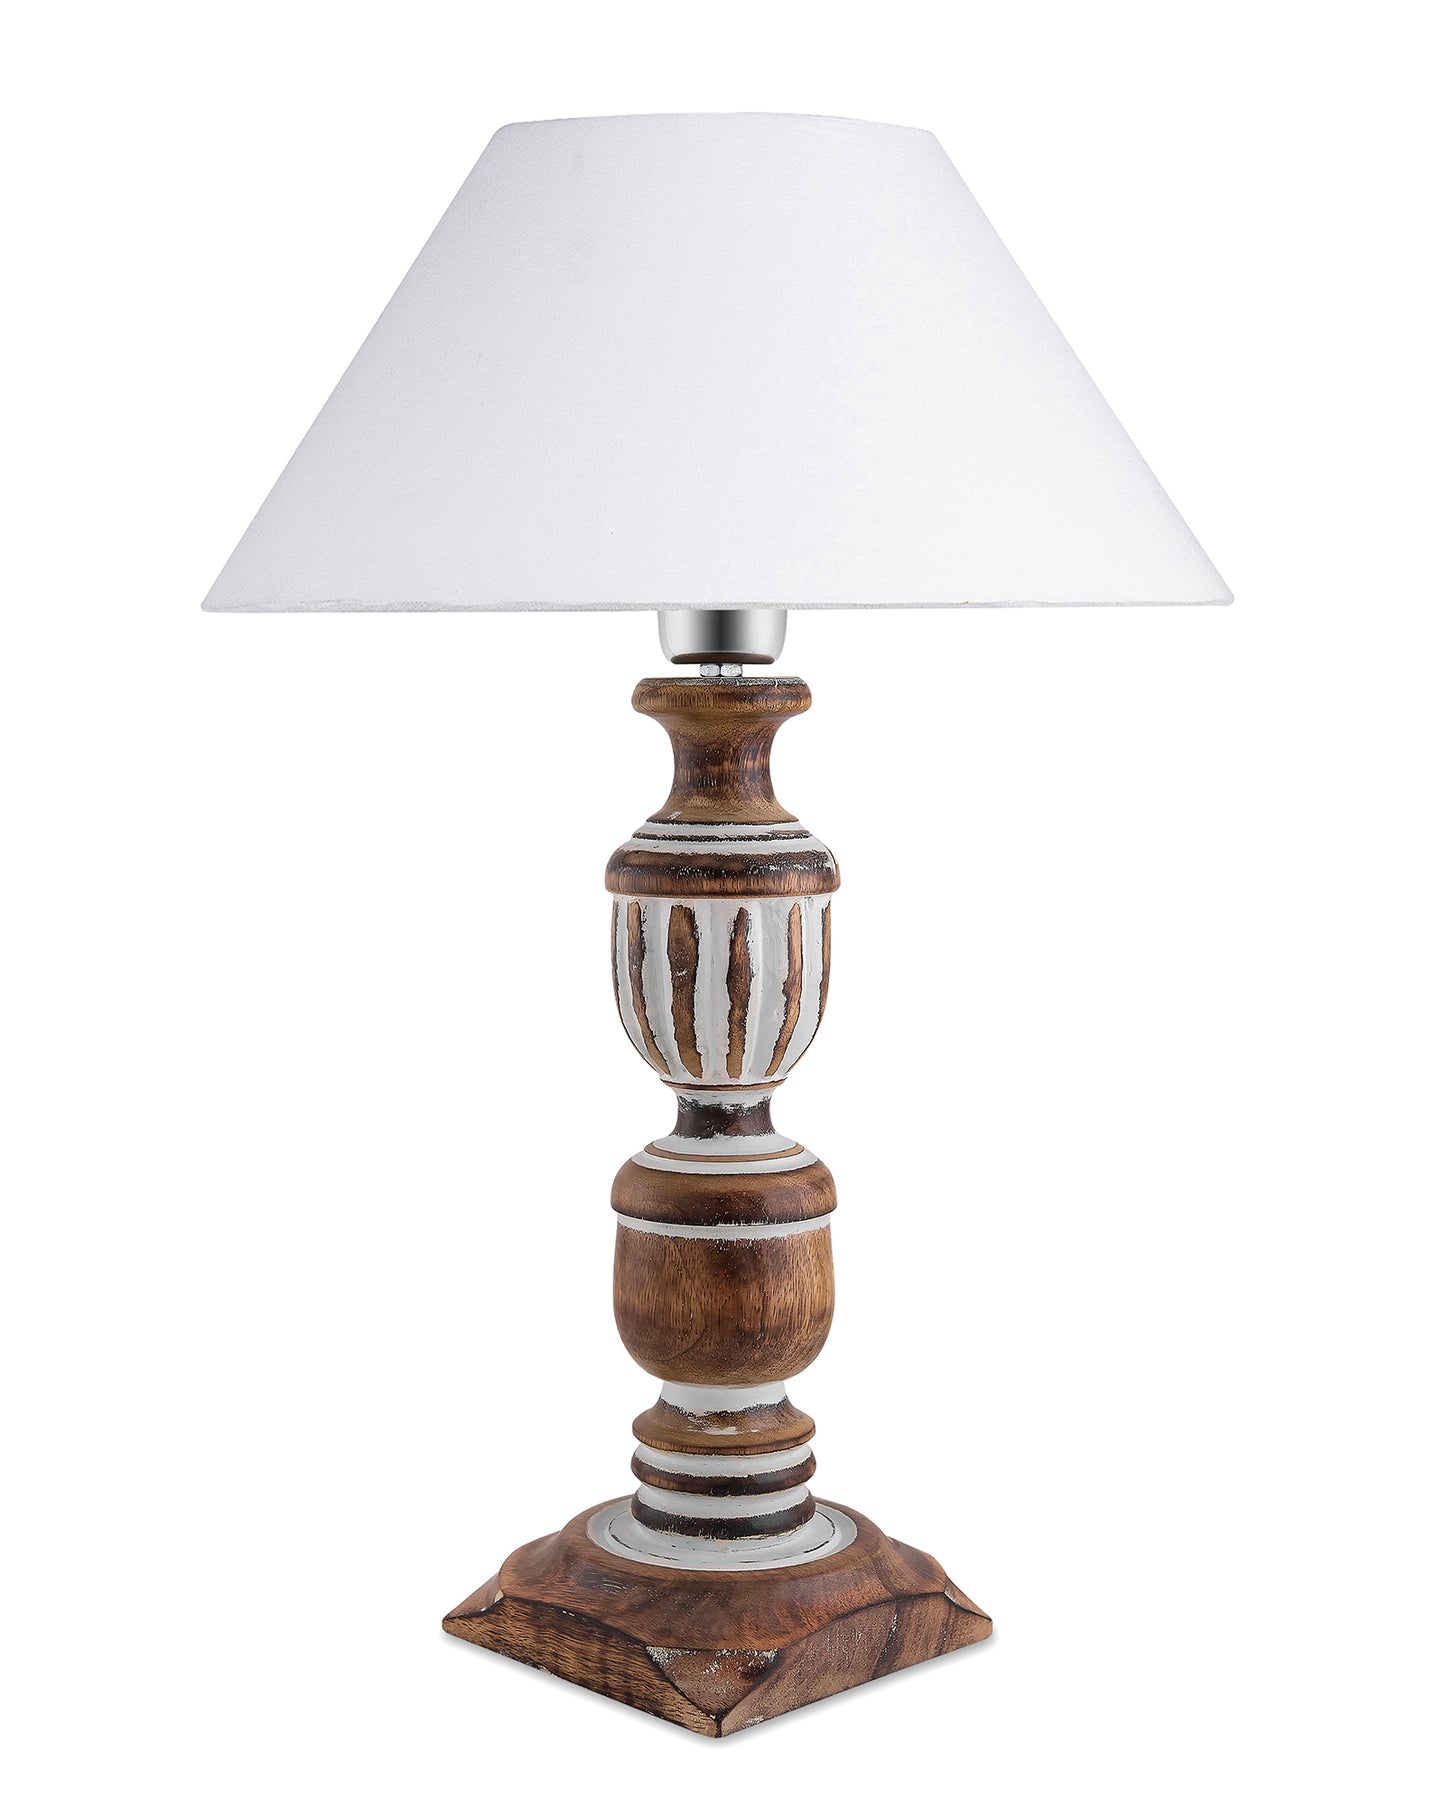 Antique White French Trophy Carved Table lamp with Cone Shade